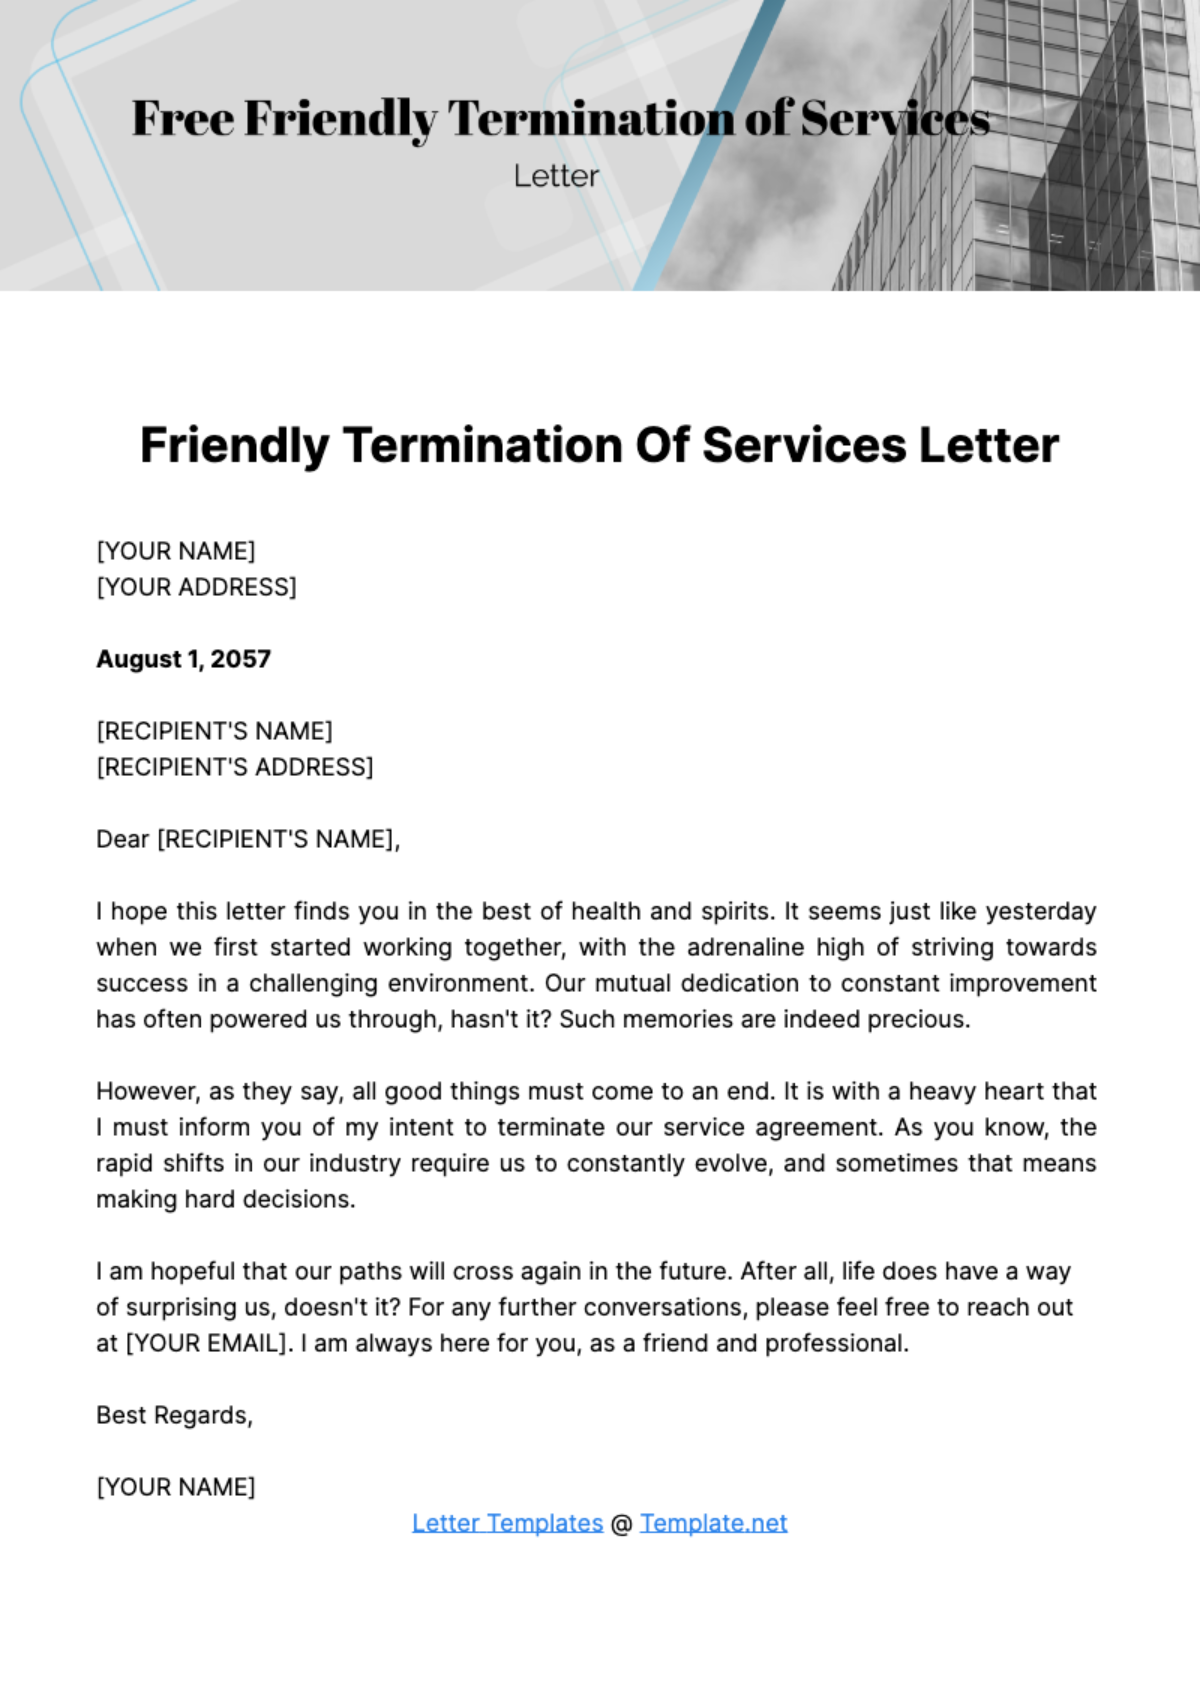 Friendly Termination of Services Letter Template